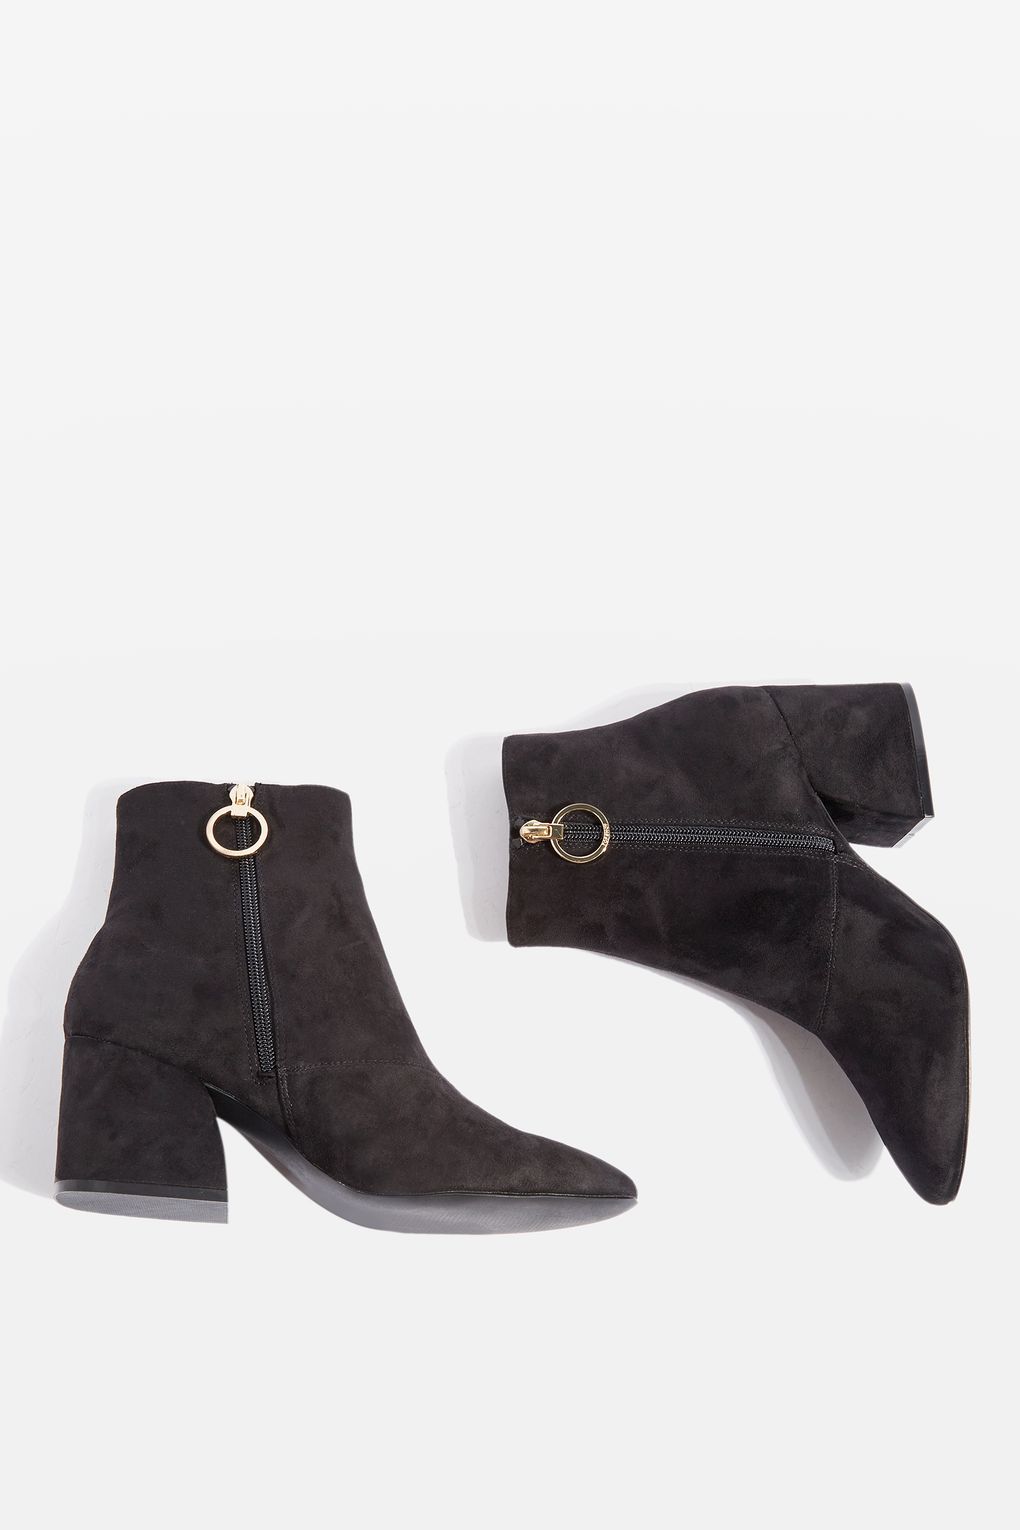 topshop ankle boots